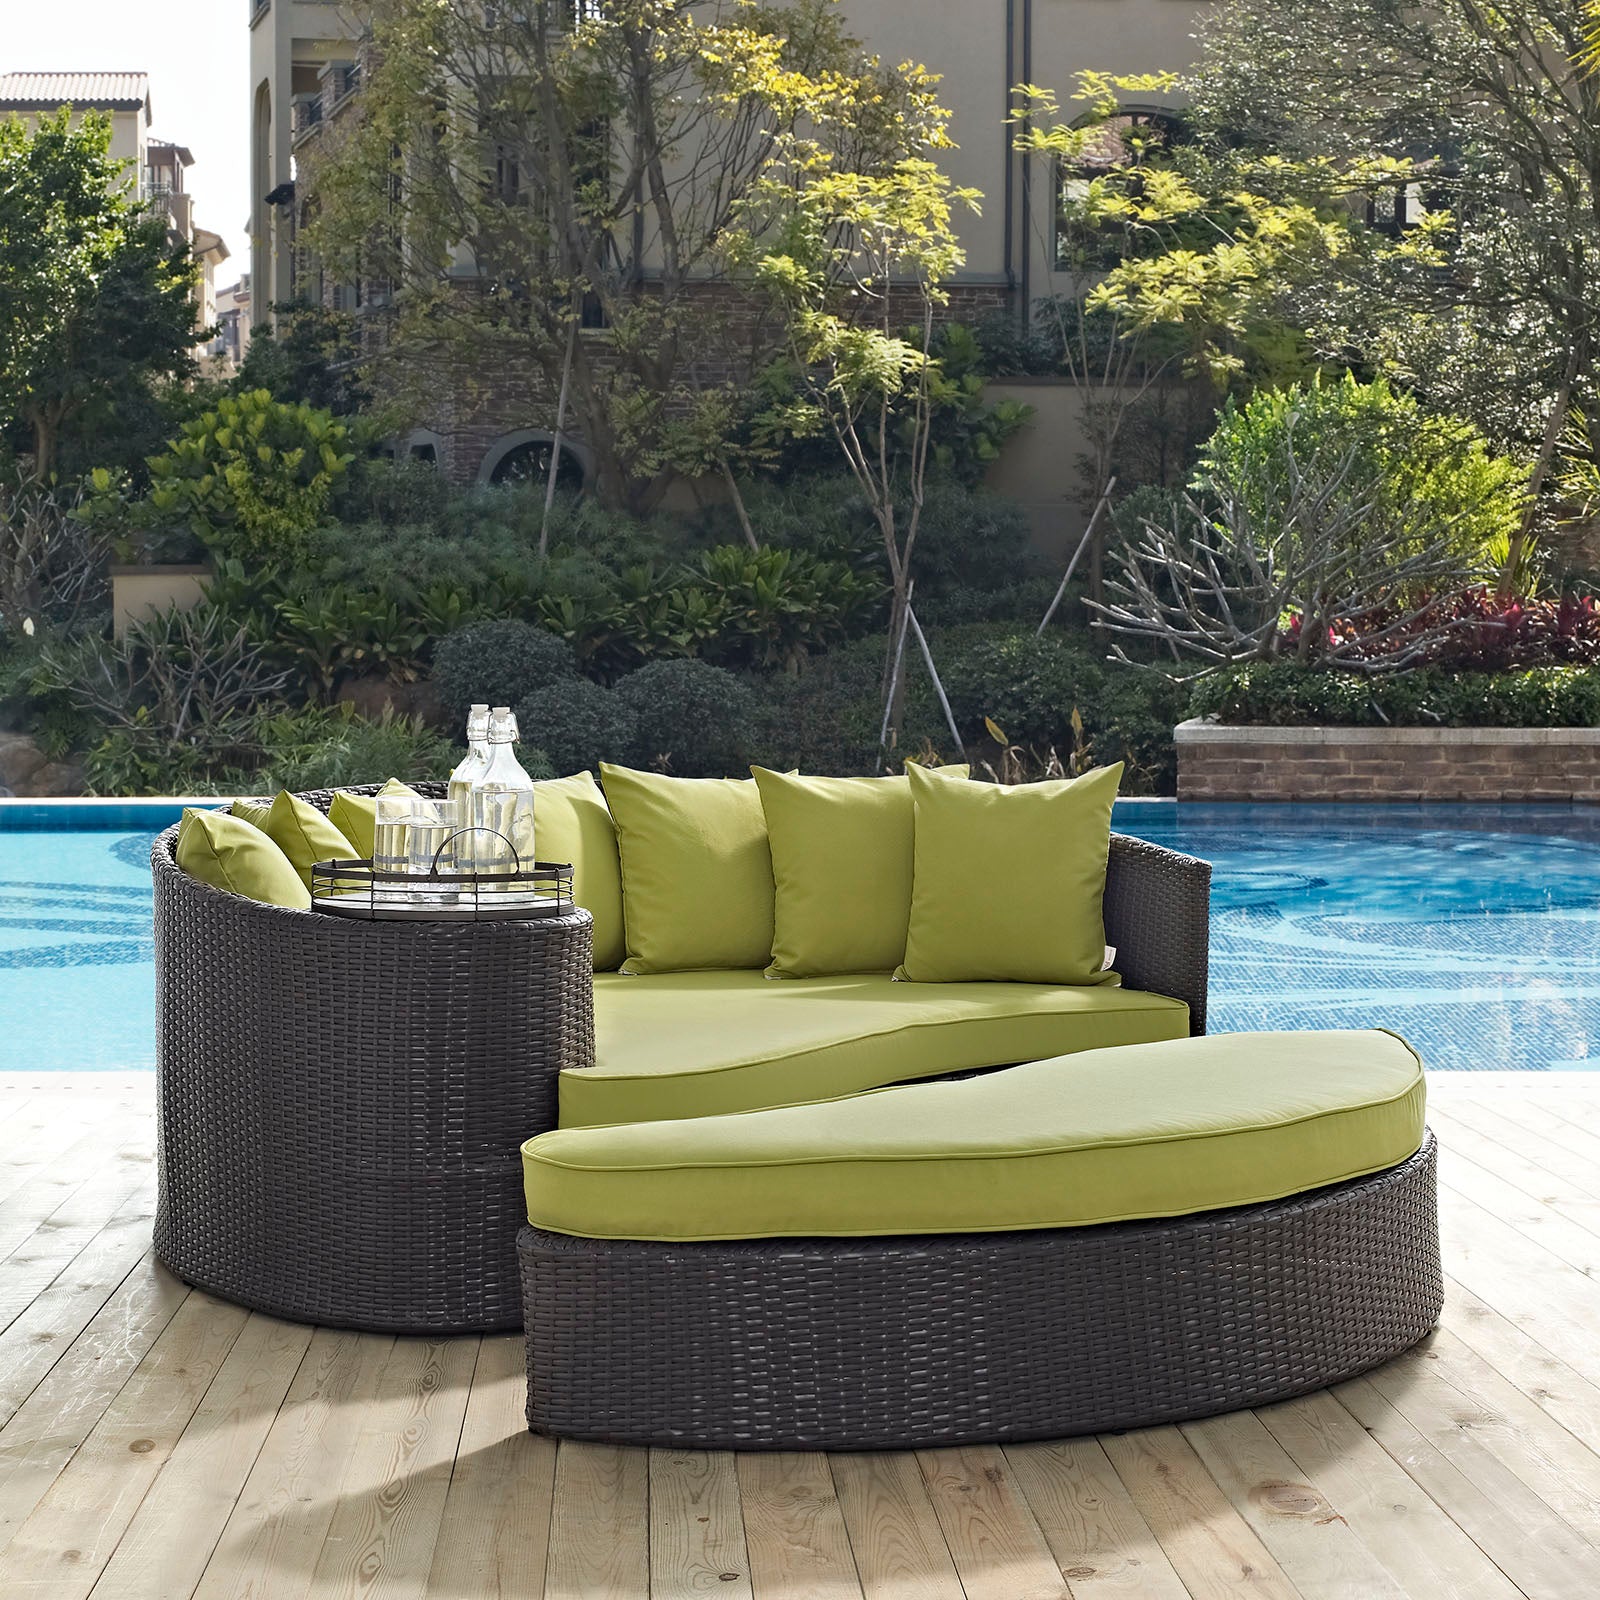 Modway Patio Daybeds - Convene Outdoor Patio Daybed Espresso Peridot